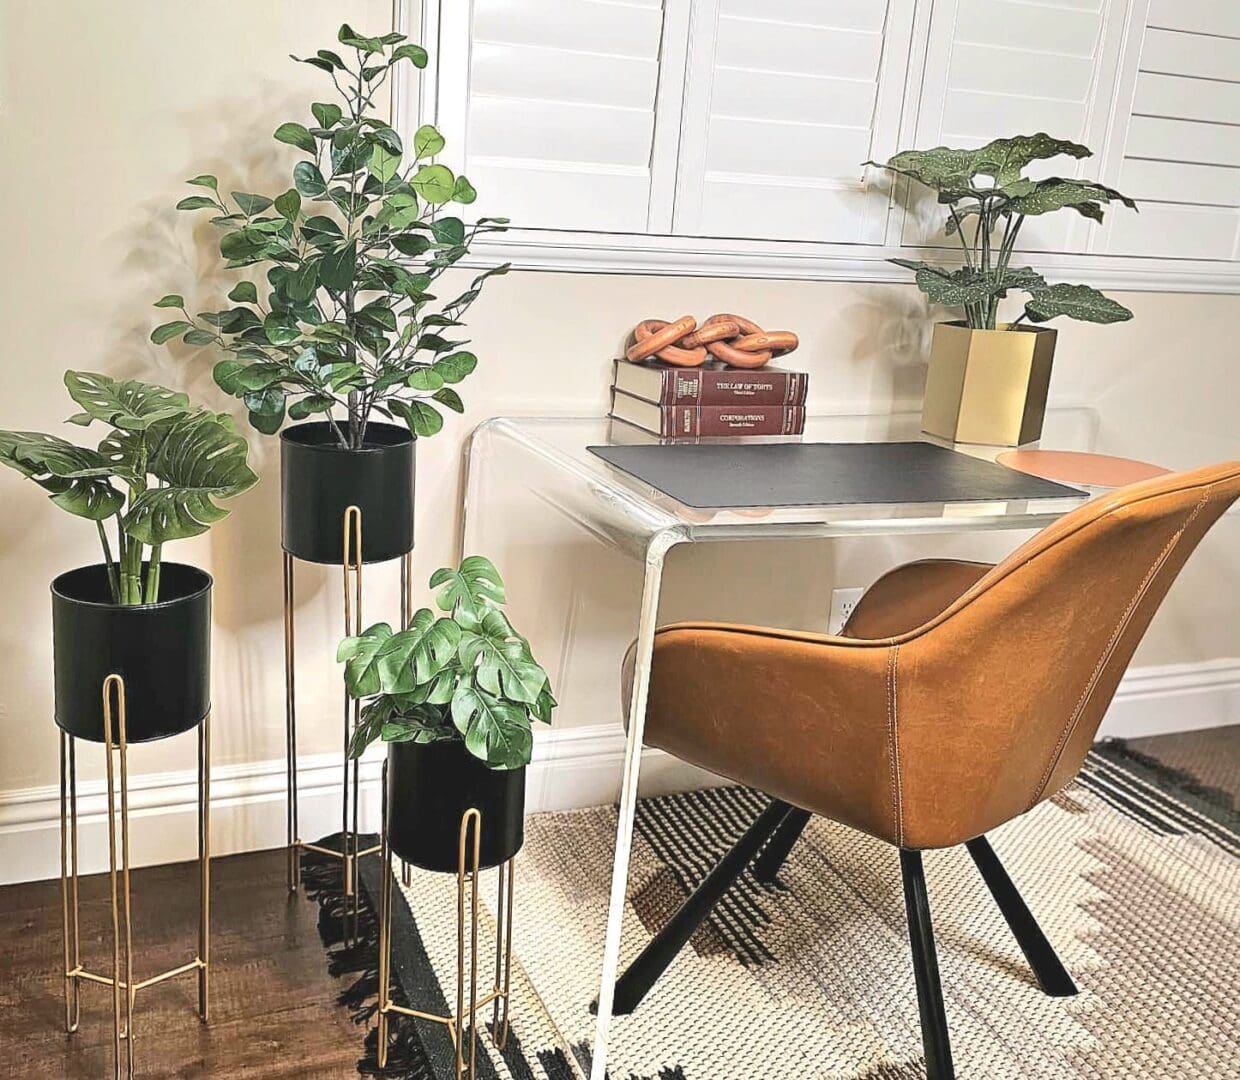 A table with chairs and plants in pots